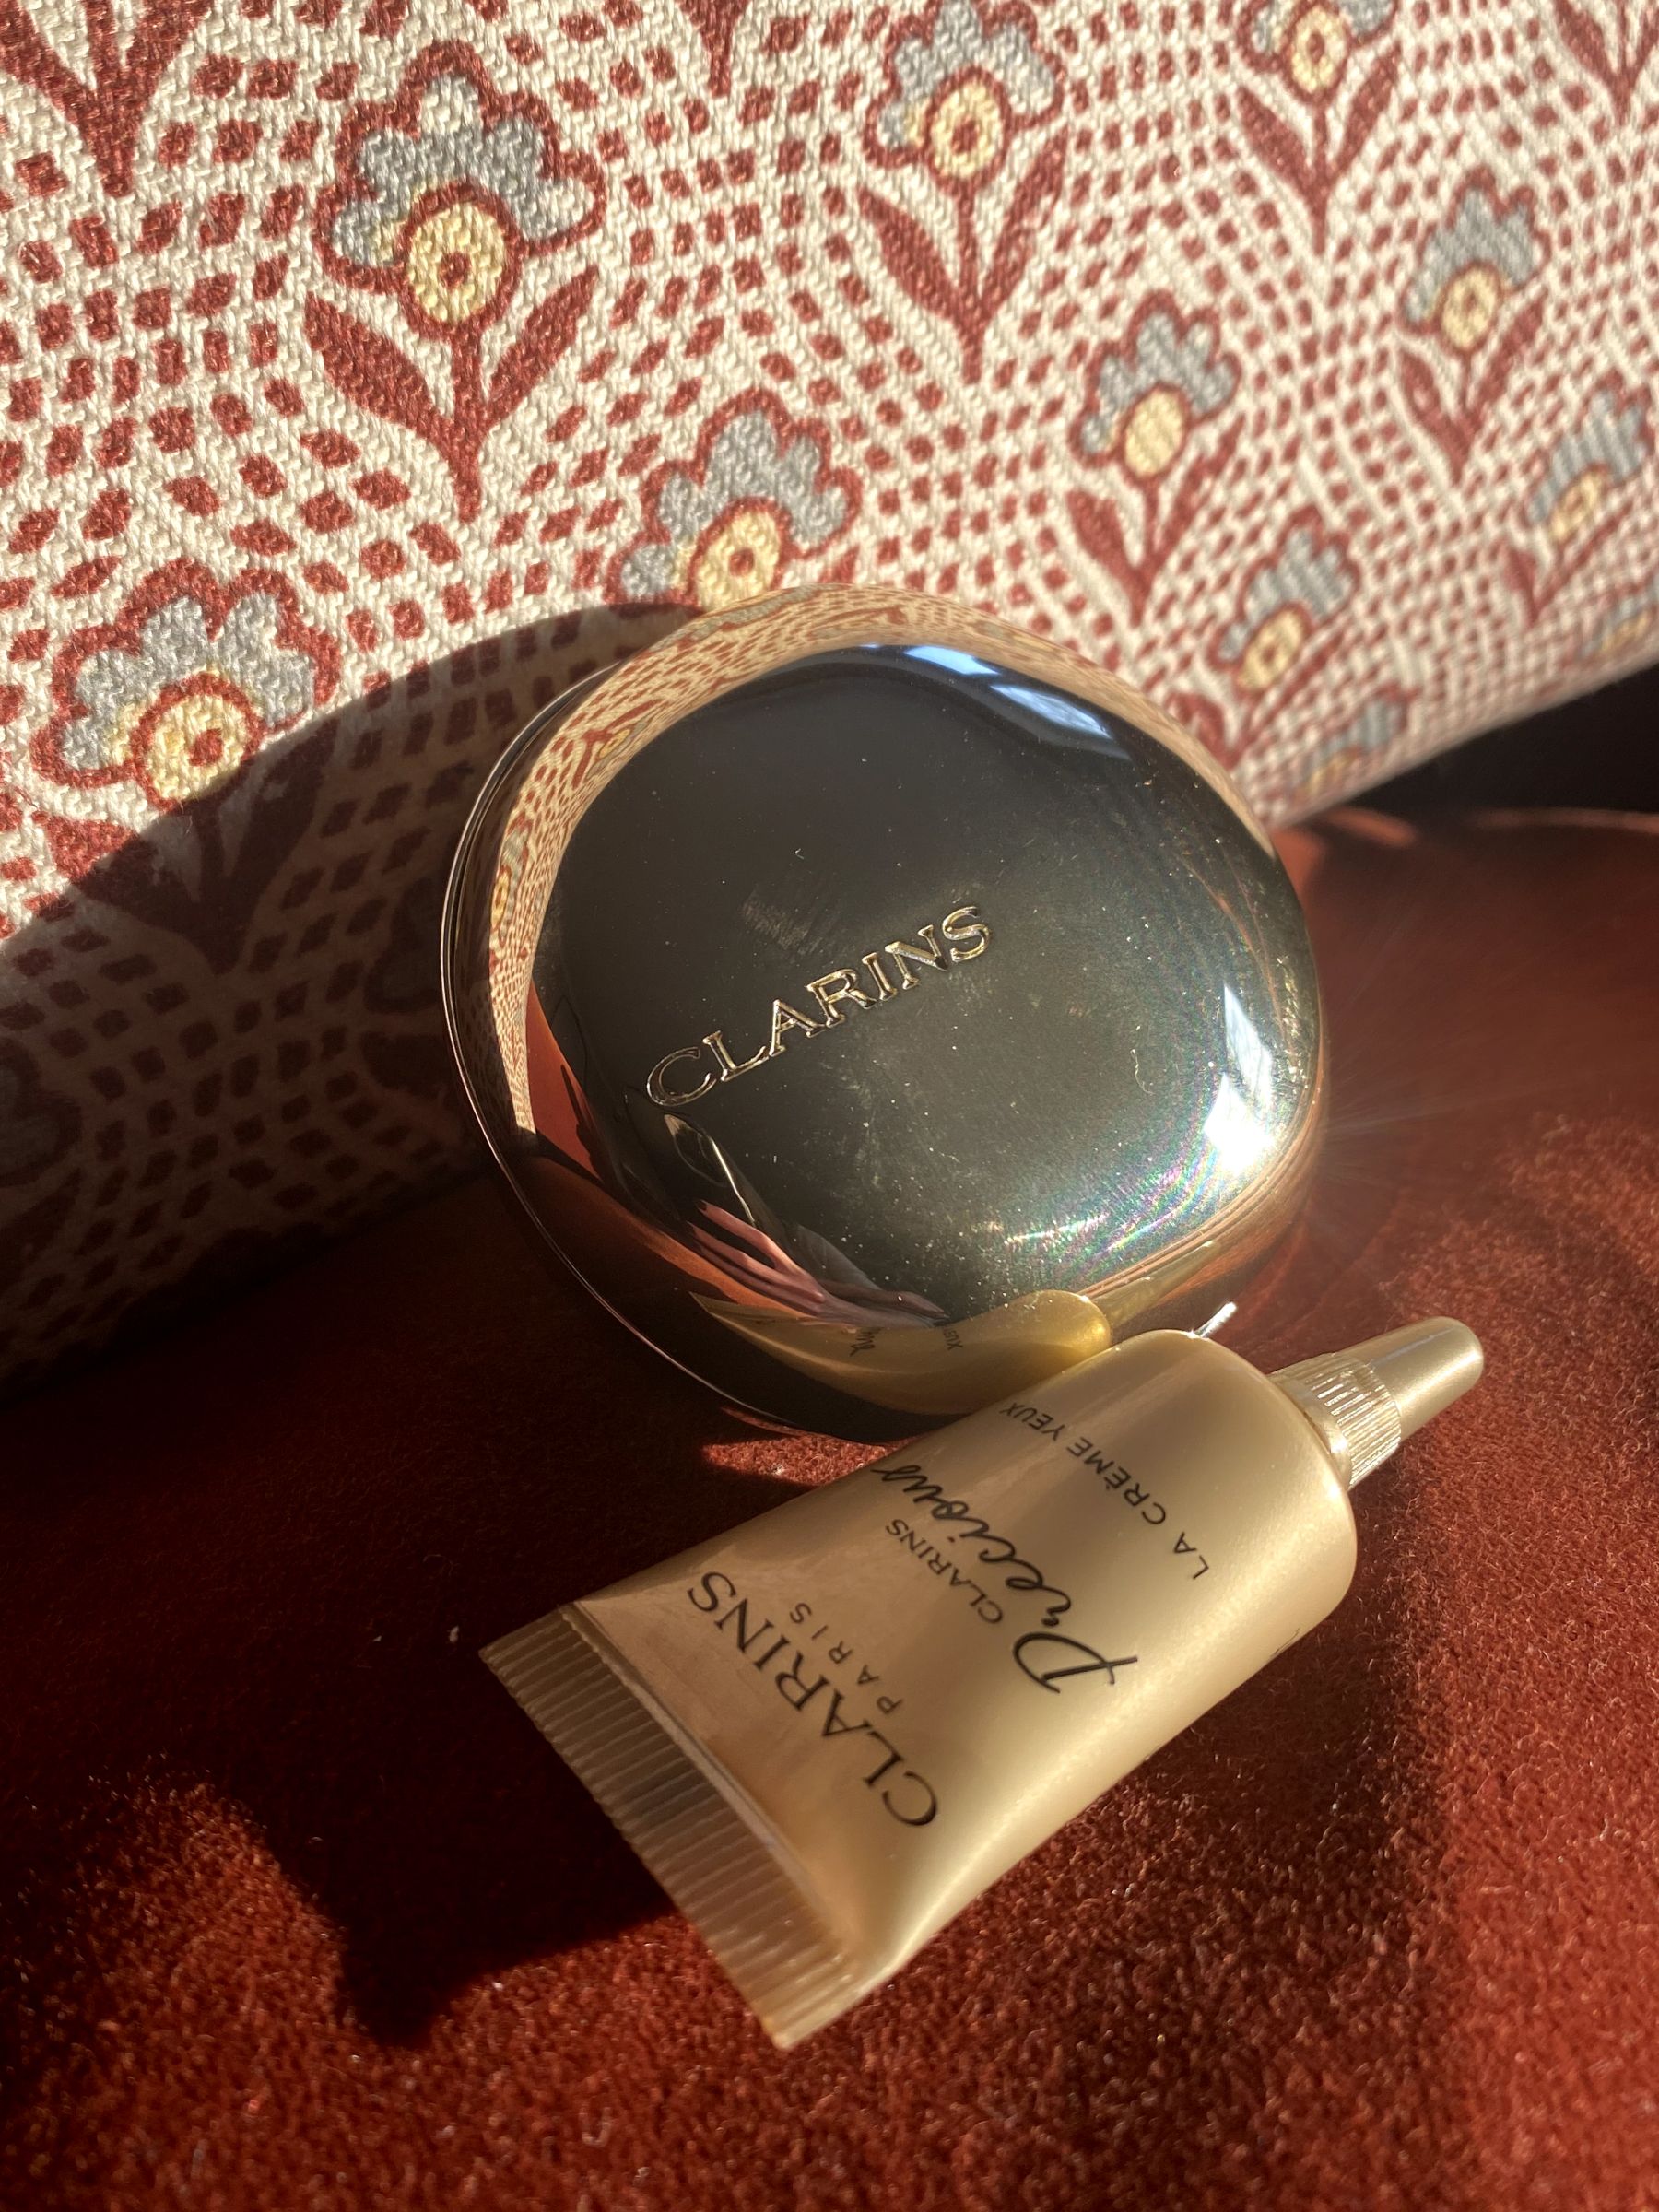 Clarins’ new luxury face crème